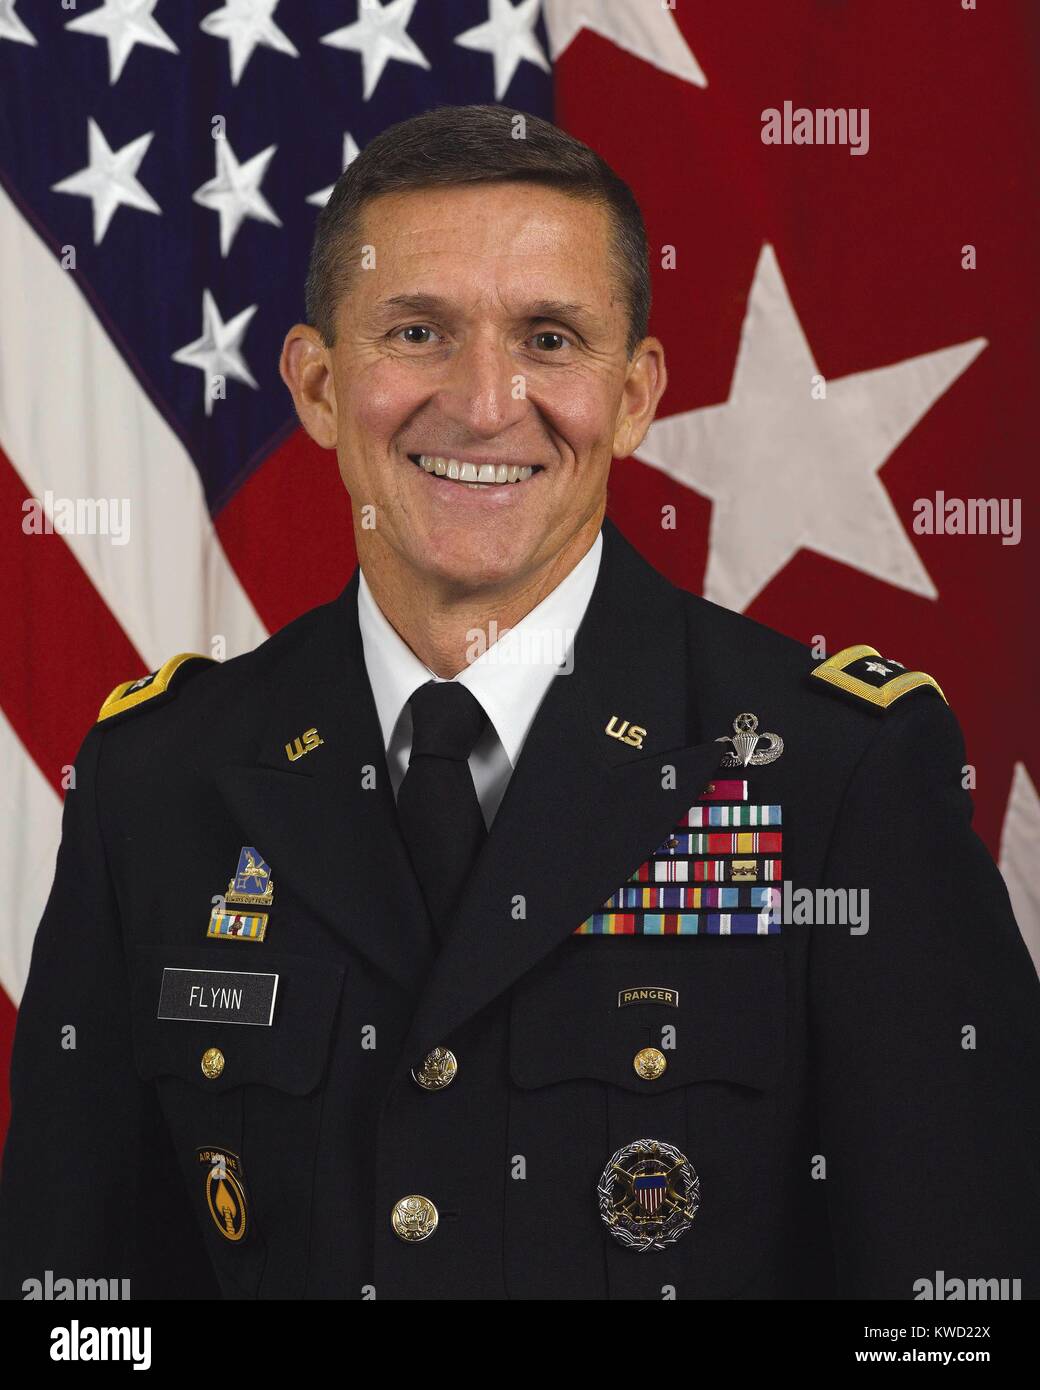 Lt. Gen. Michael T. Flynn, Director of the Defense Intelligence Agency from June 2012-August 2014. After a brief tenure as President Donald Trumps National Security Advisor, he was forced to resign. Late in the 2017, he was indicted and pleaded guilty to lying to the FBI  (BSLOC_2017_20_108) Stock Photo